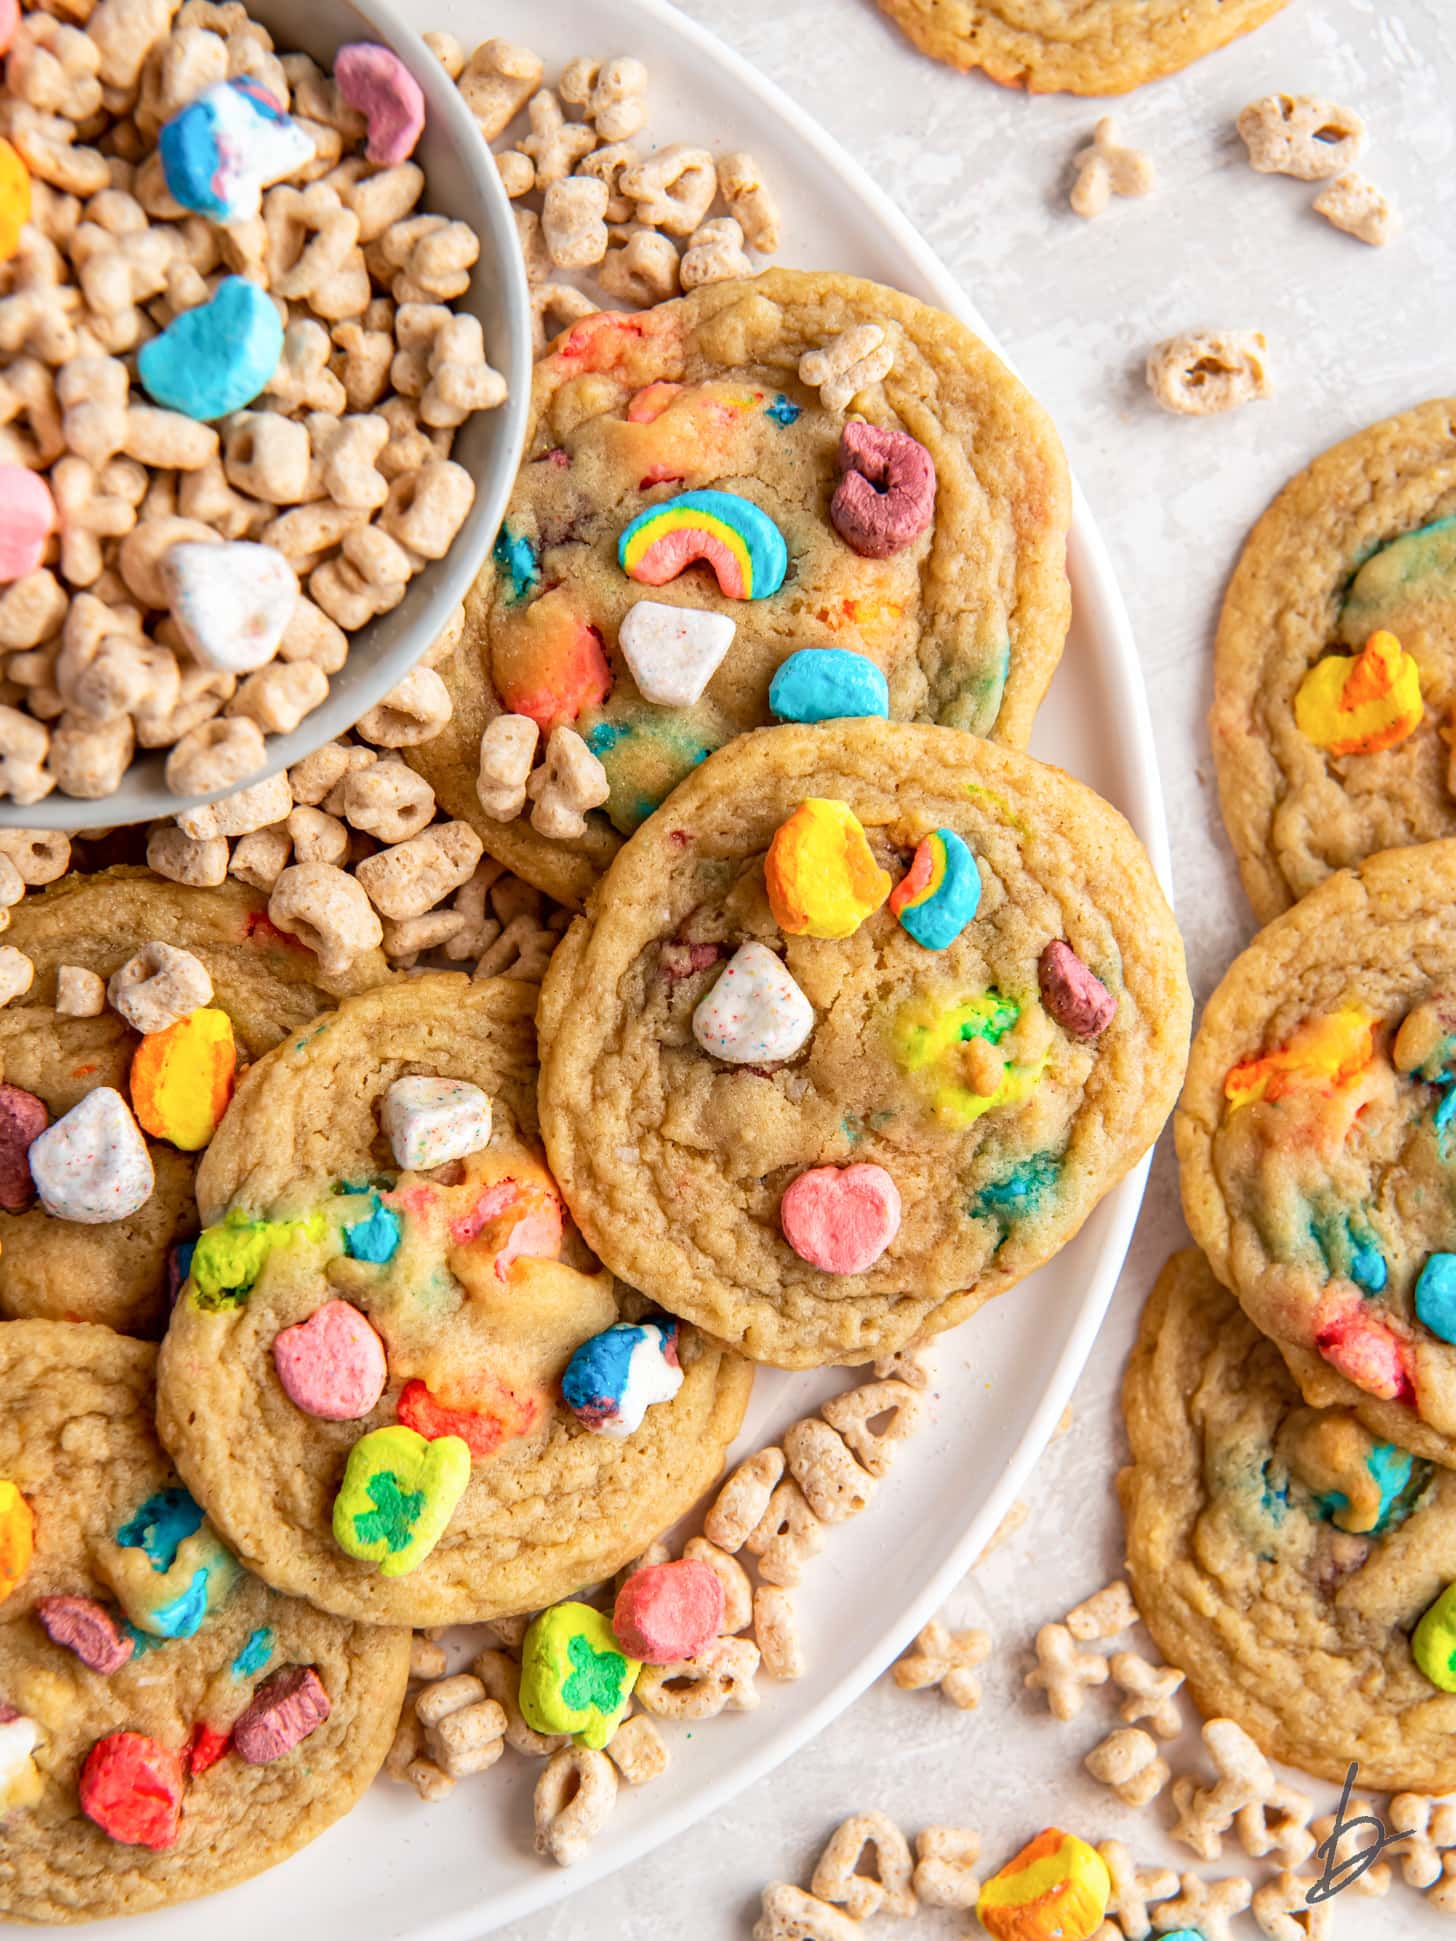 lucky charms cookies on a plate with a bowl of cereal.